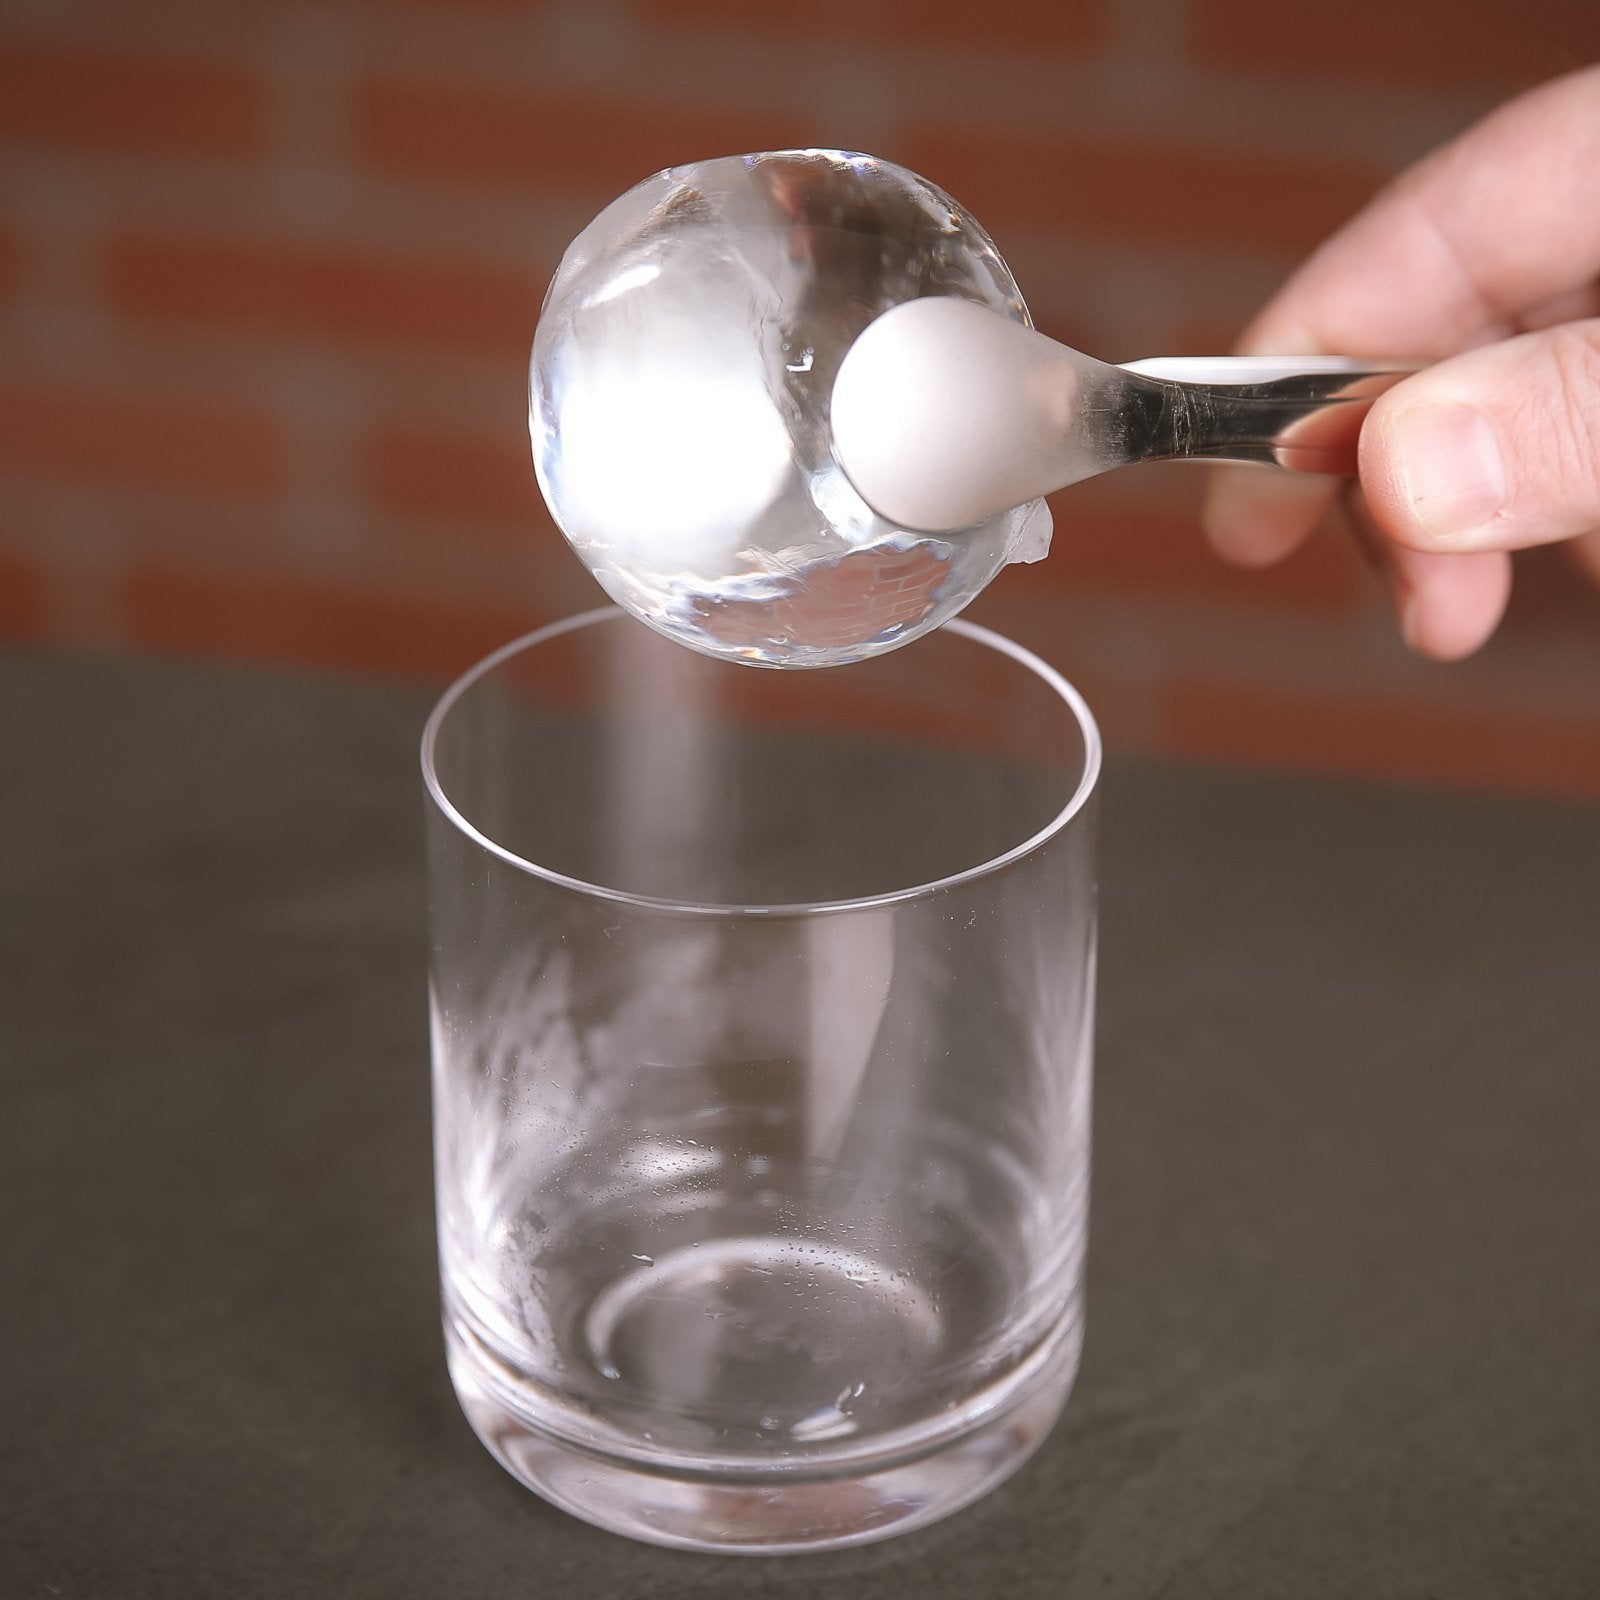 Clear Ice Ball Maker - Silicone Ice Cube Maker, Ice UAE